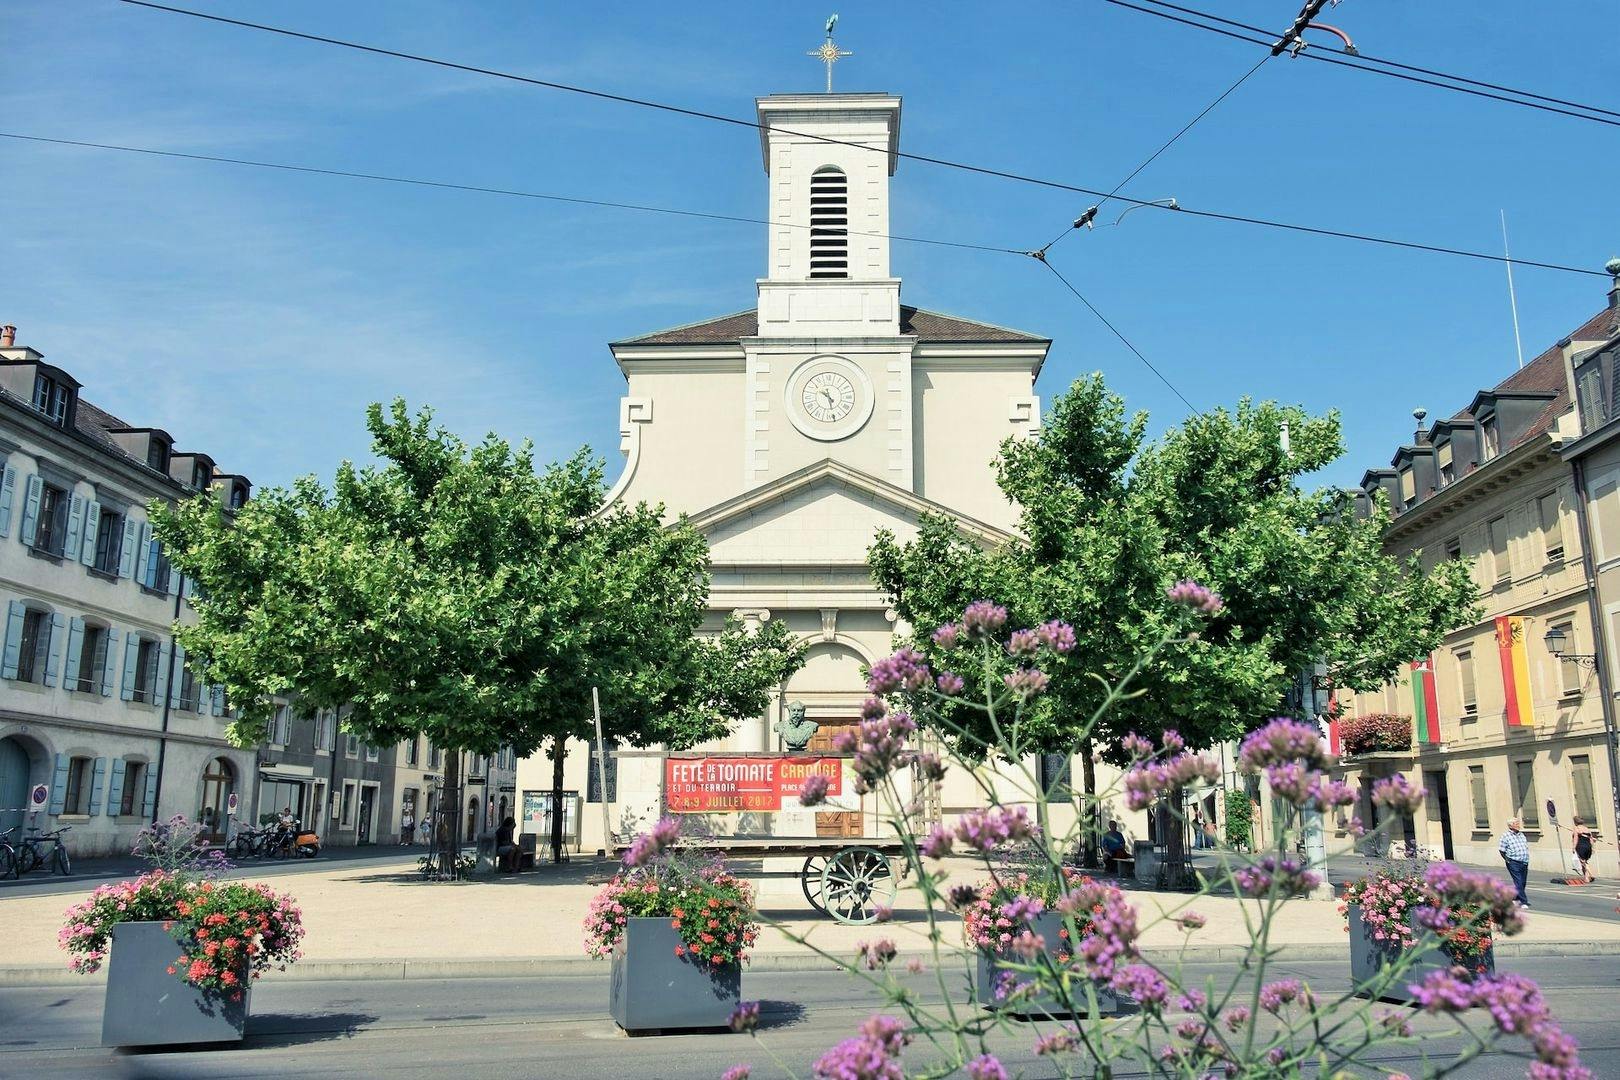 Self-guided audio tour of the Carouge district in Geneva